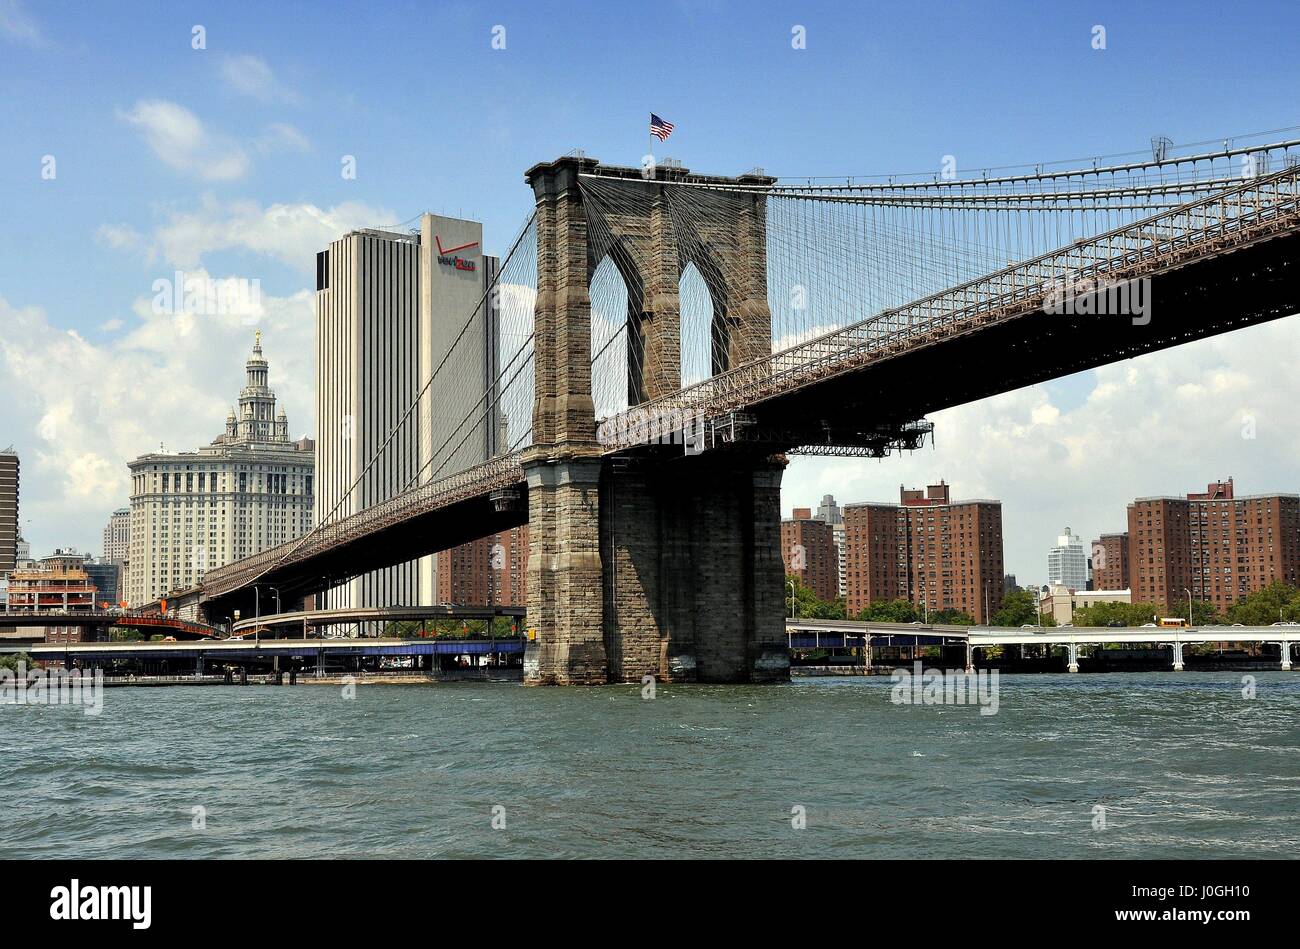 New York City - August 4, 2011:   View of the west tower of the Brooklyn Bridge spanning the East River Stock Photo